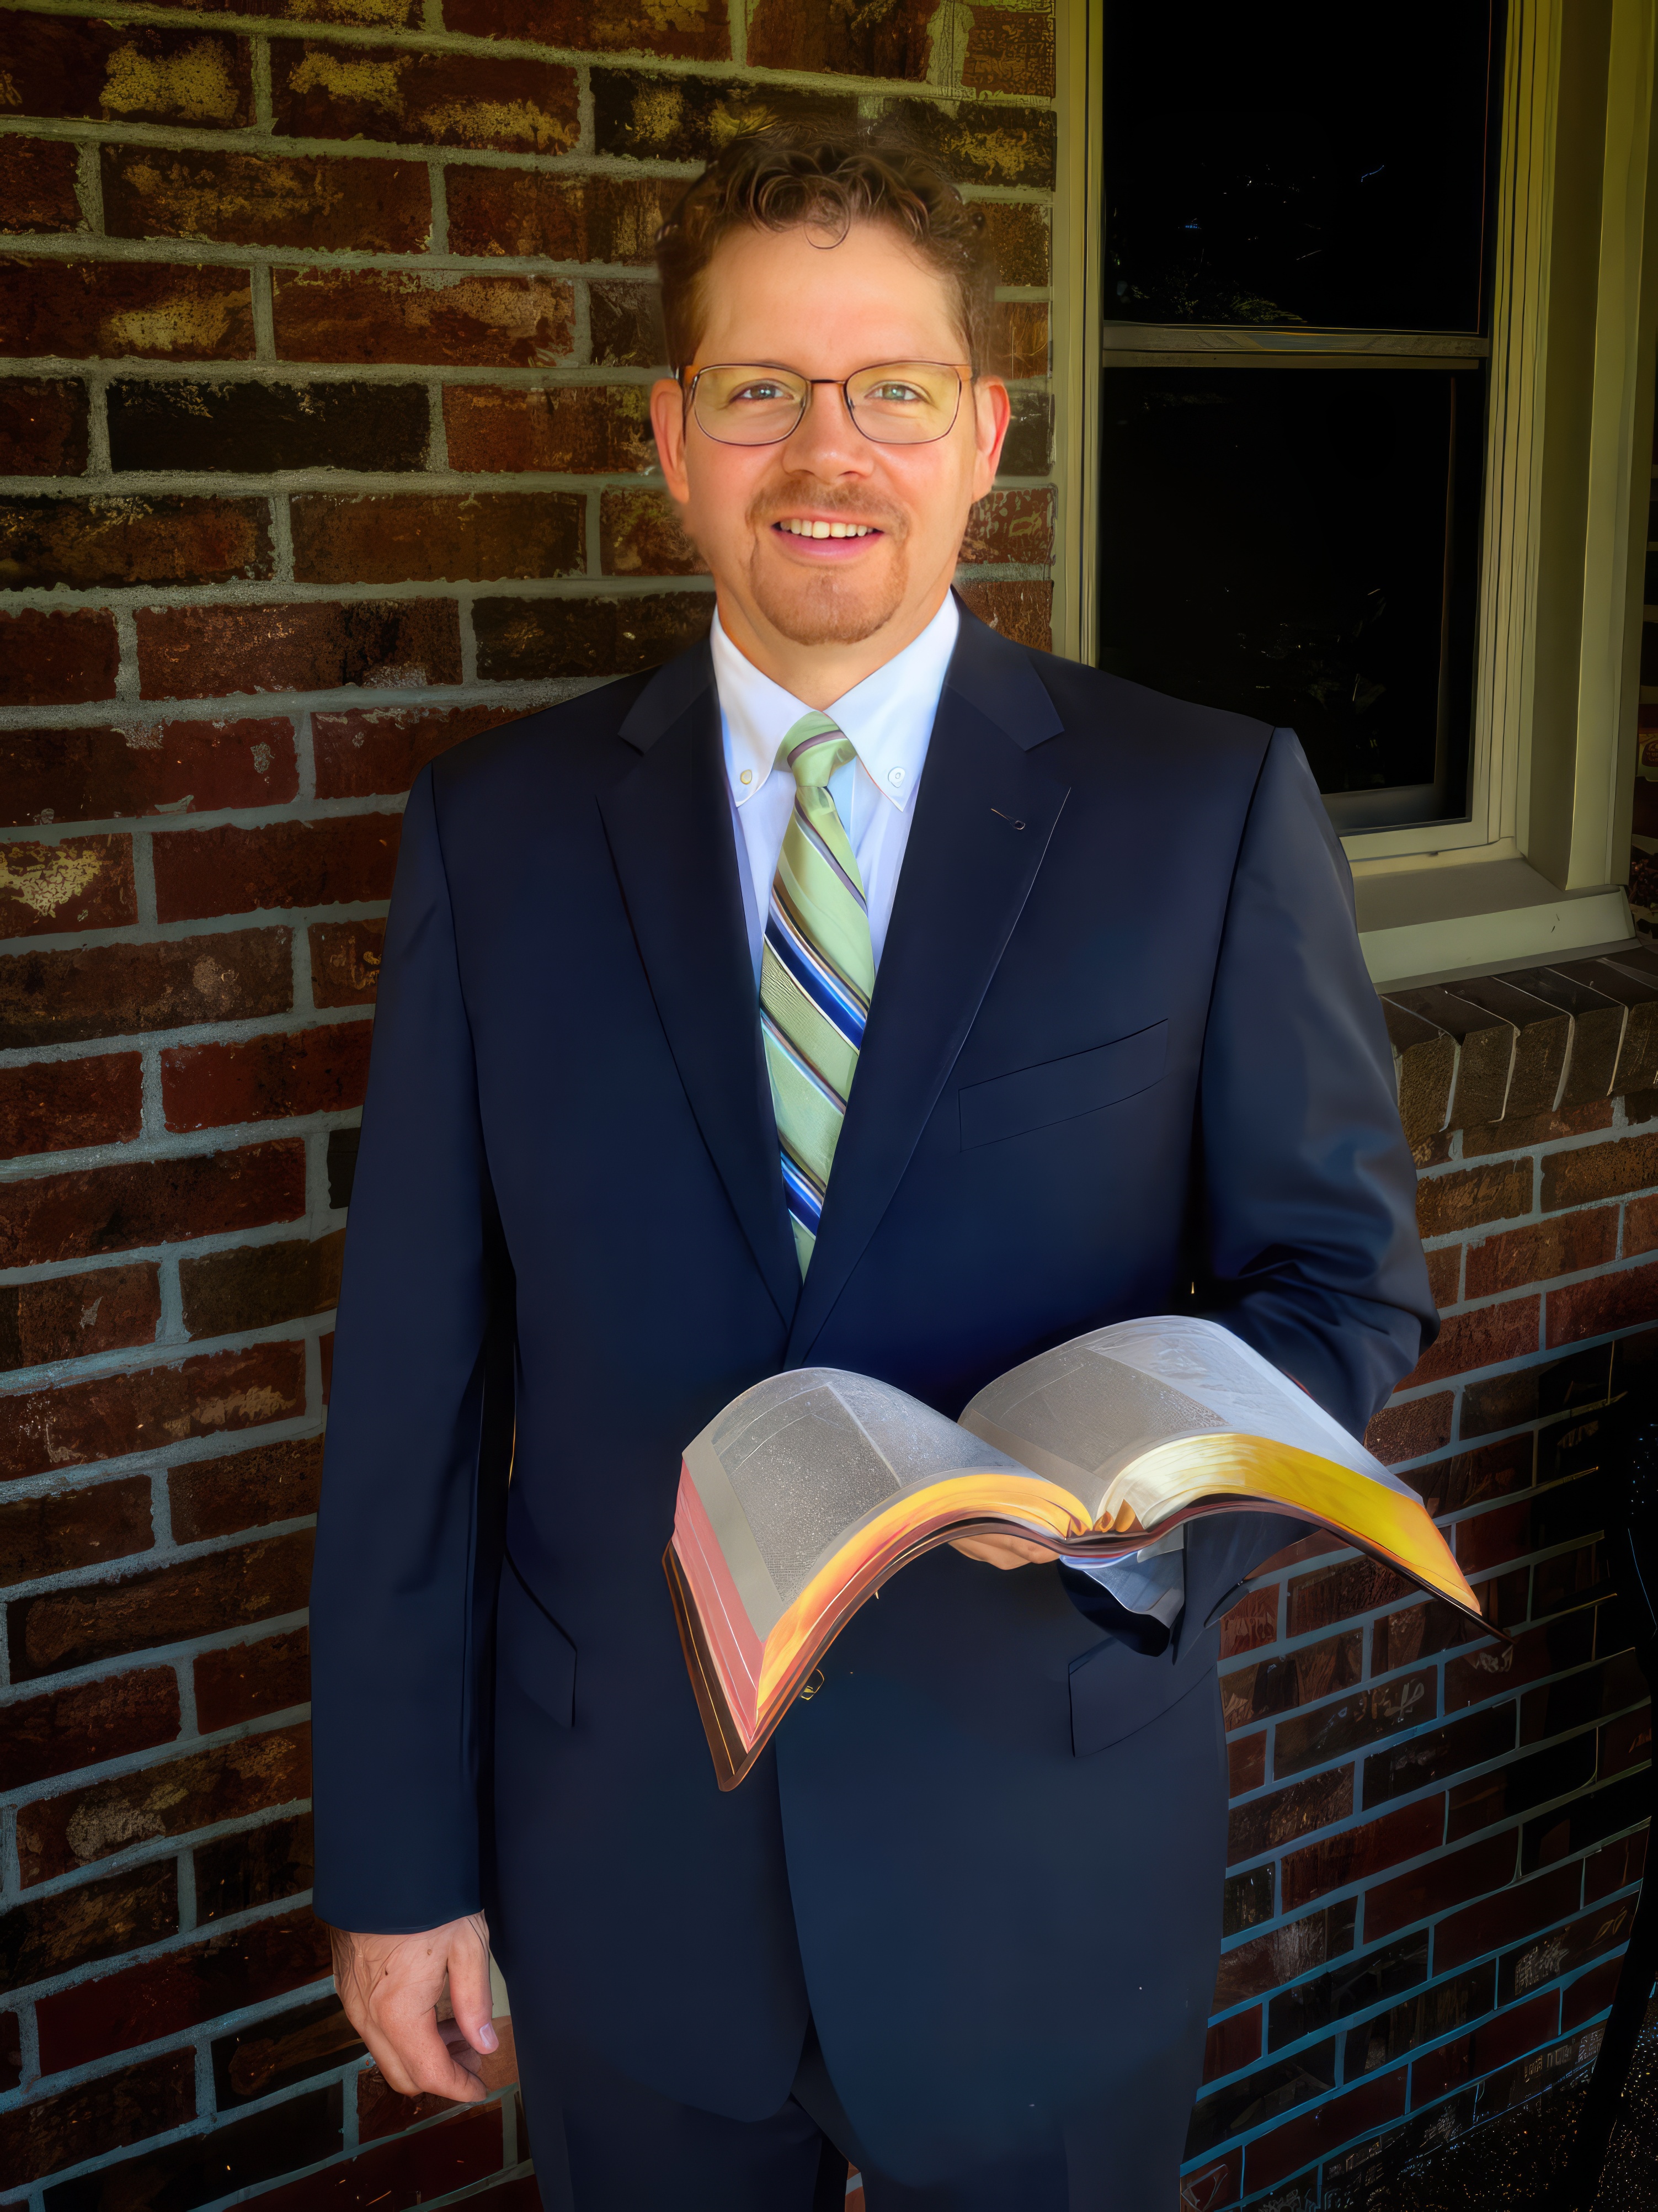 White man holding a Bible standing in front of a building with a window to the right of him